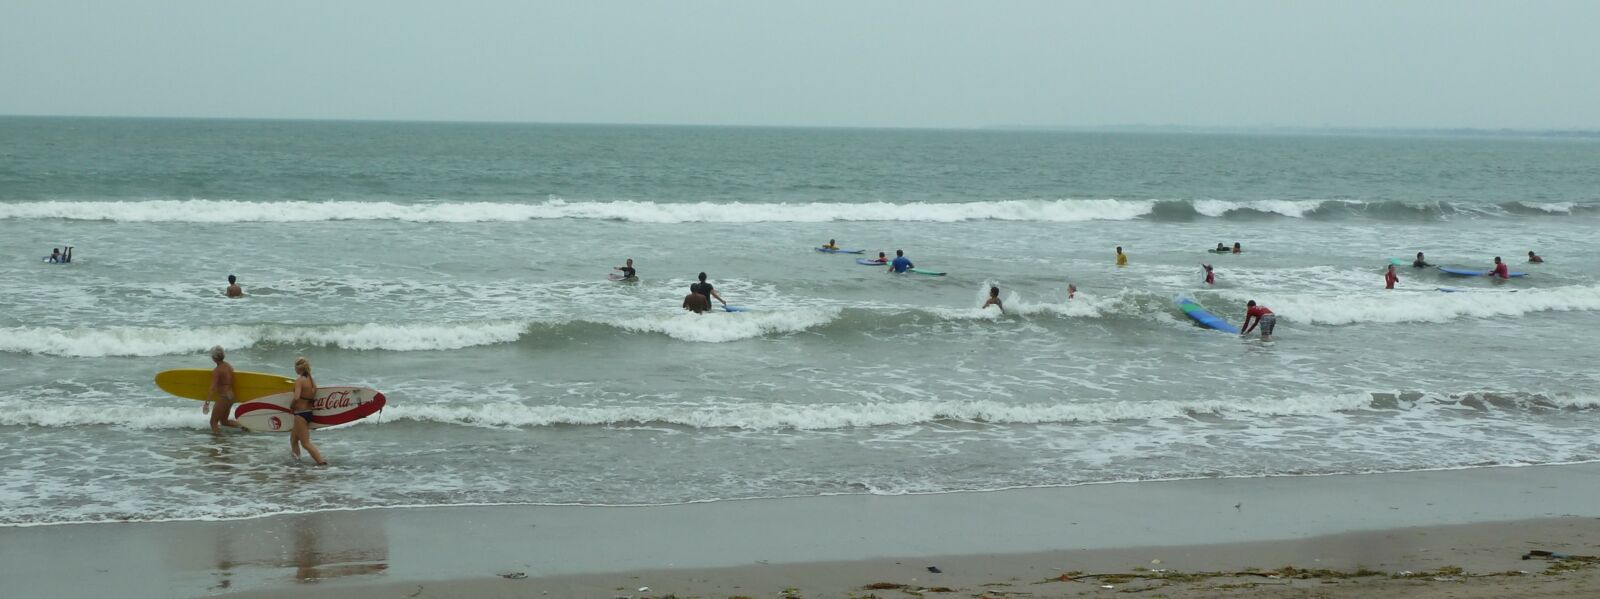 People surfing